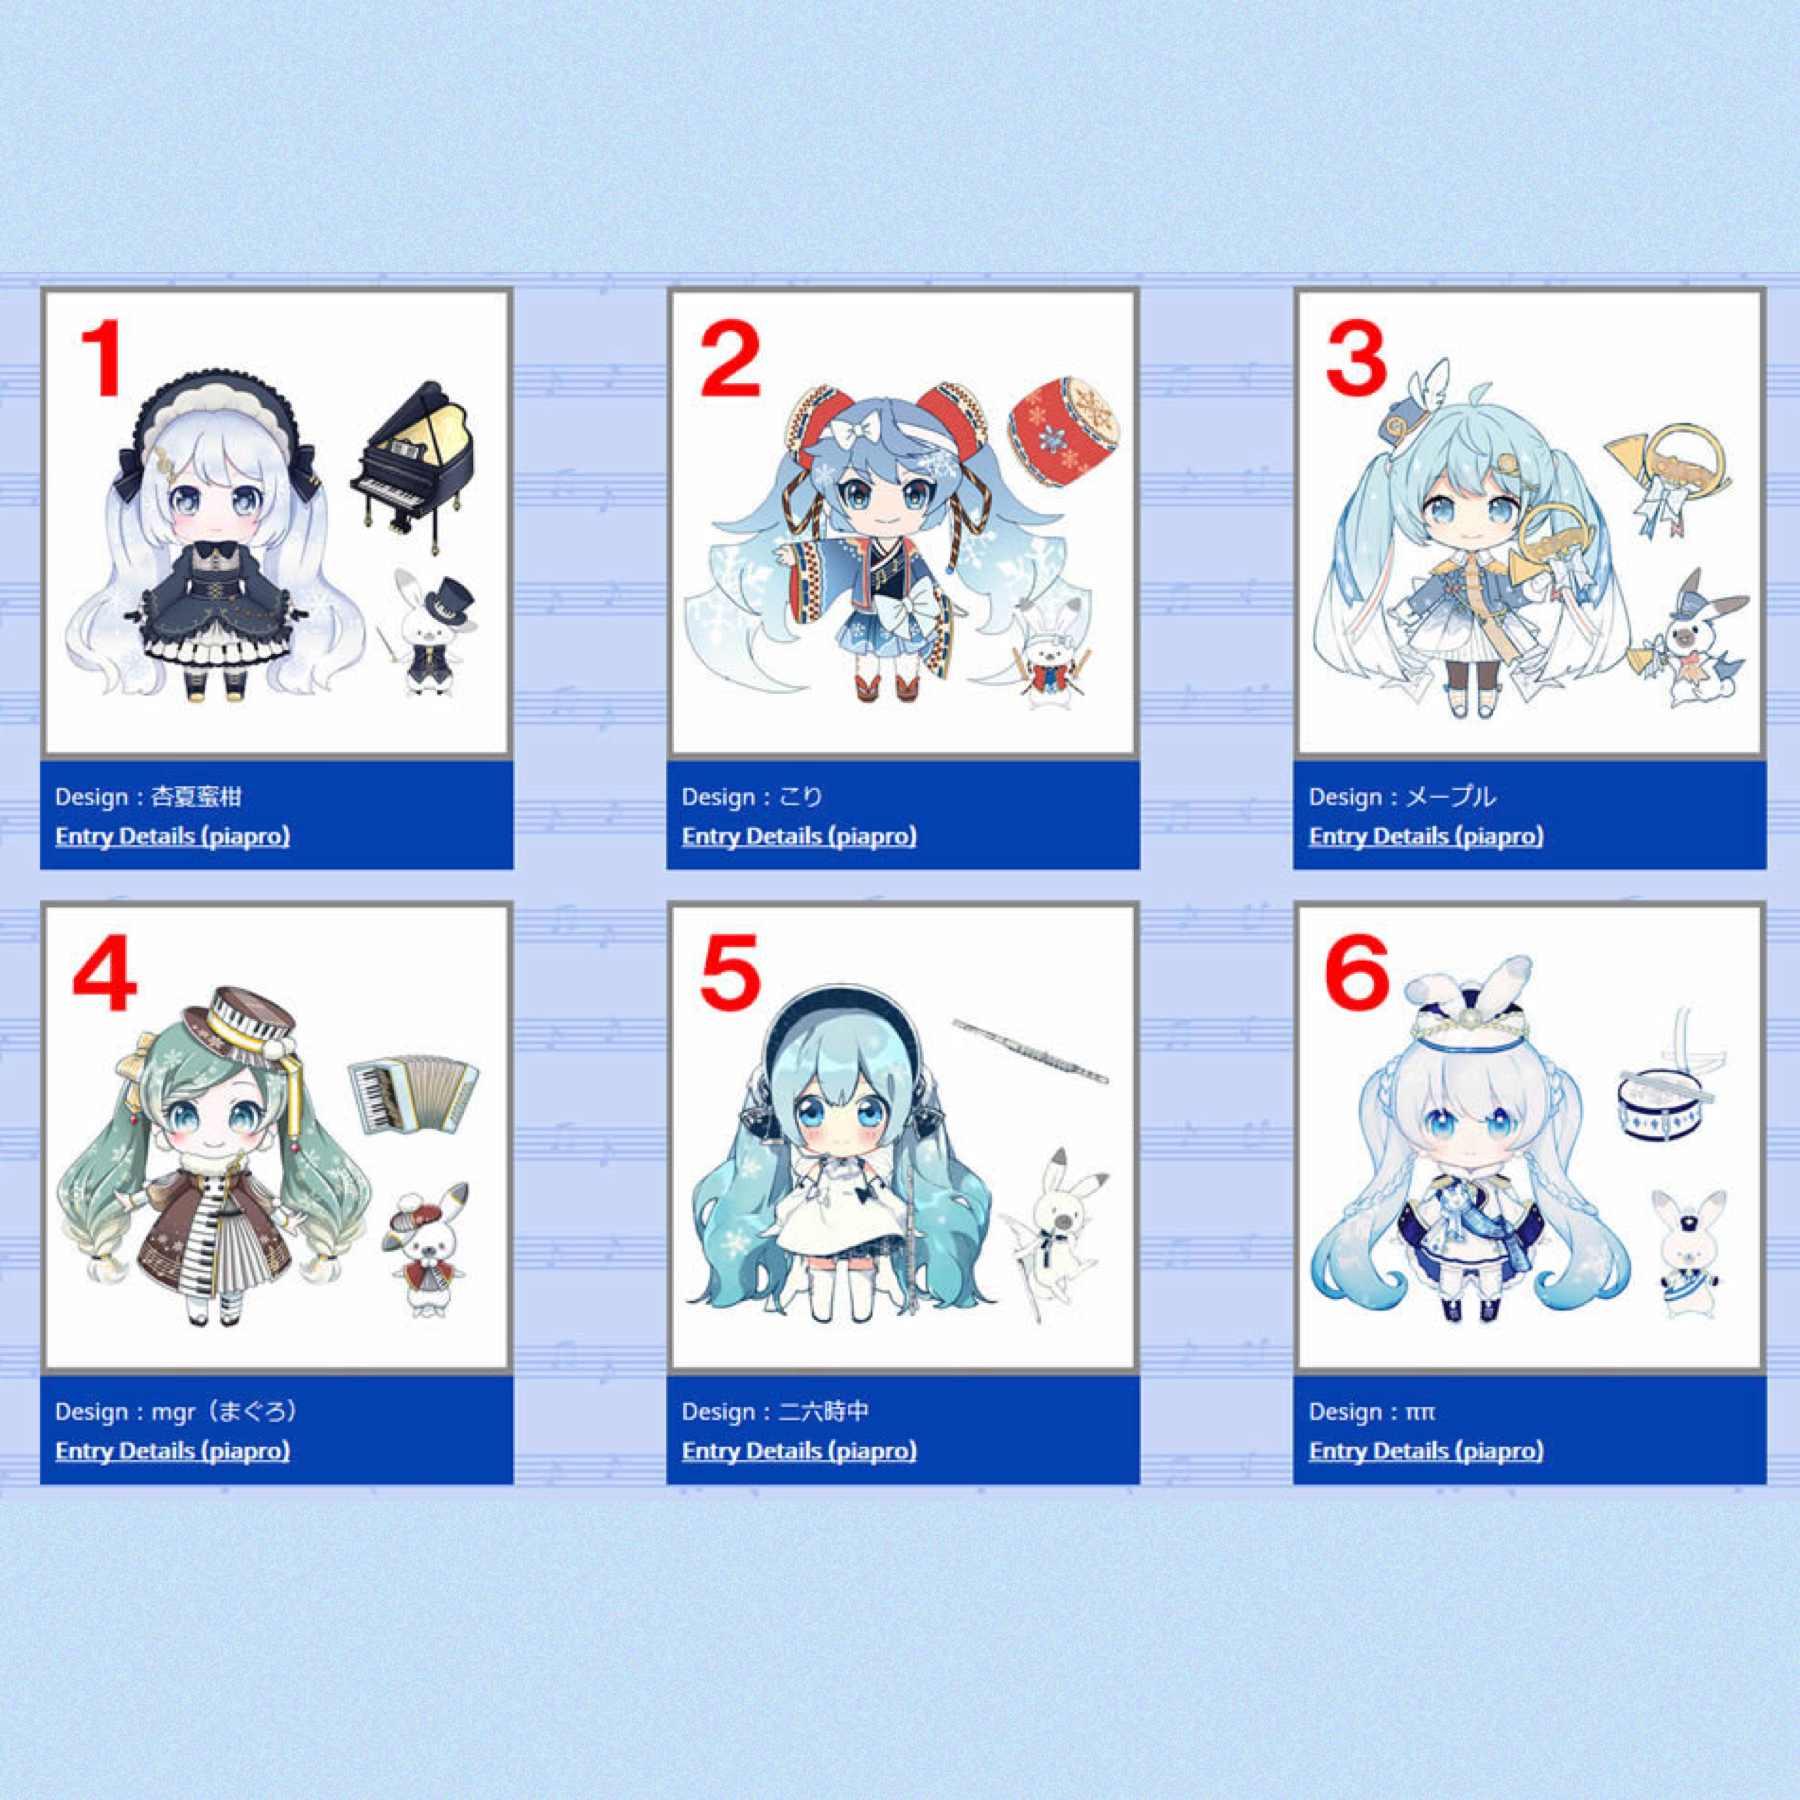 ❄️Tap❄️
Y’all better be celebrating snow Miku season! If not I’ll beat you up. But yeah I really like the designs for 2020 snow Miku 